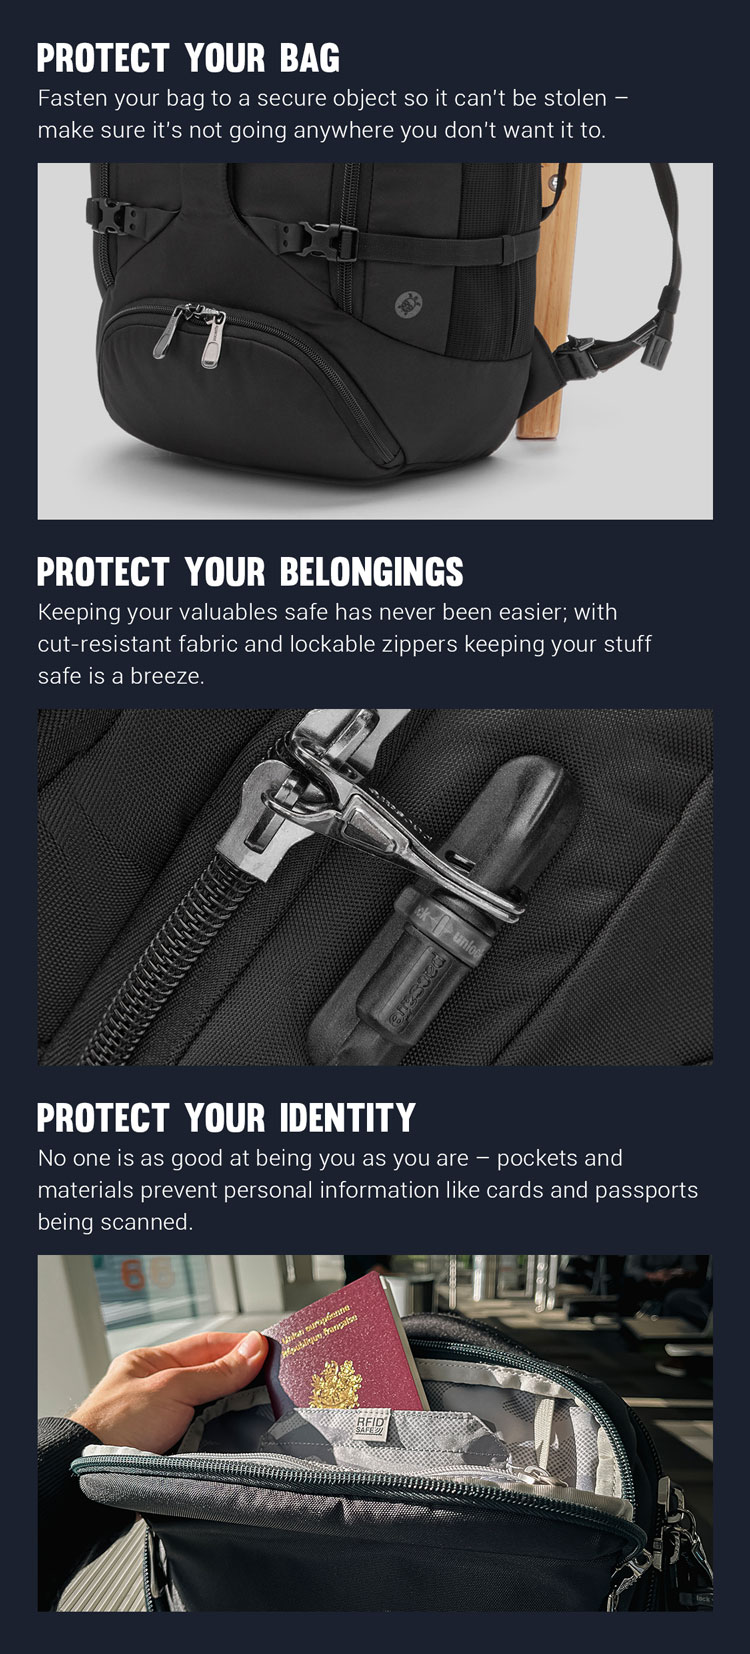 Travel & Security Accessories - Anti Pickpocket Travel Devices